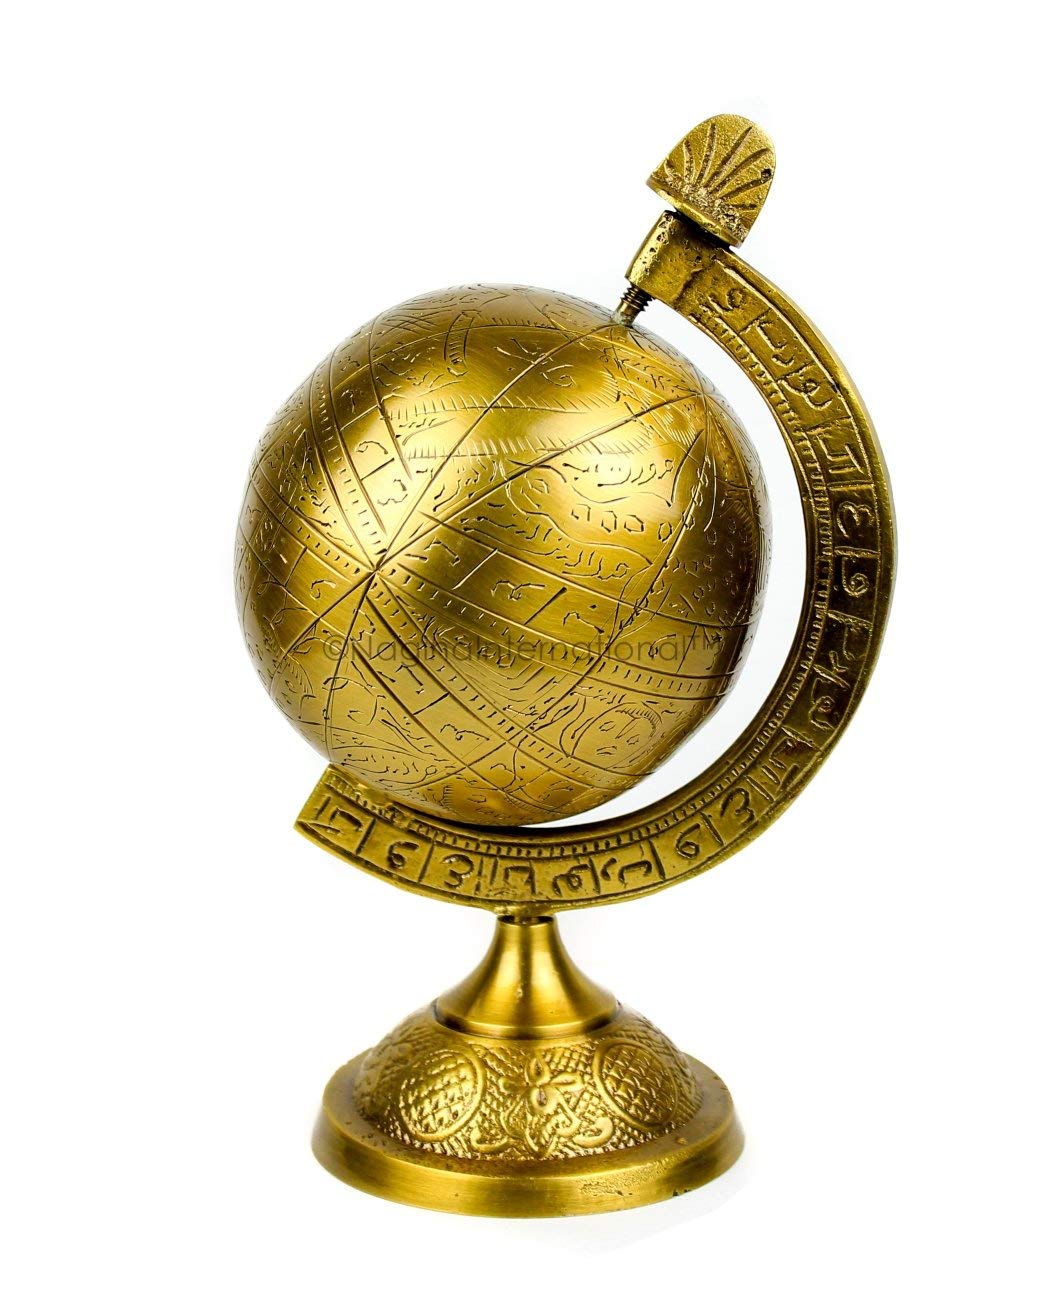 Nagina International Decorative Hanging & Standing Solid Antique Brushed Brass Armillary Sphere | Nautical Antique Globes | Vintage Decor Ornaments (Small Standing Sphere)